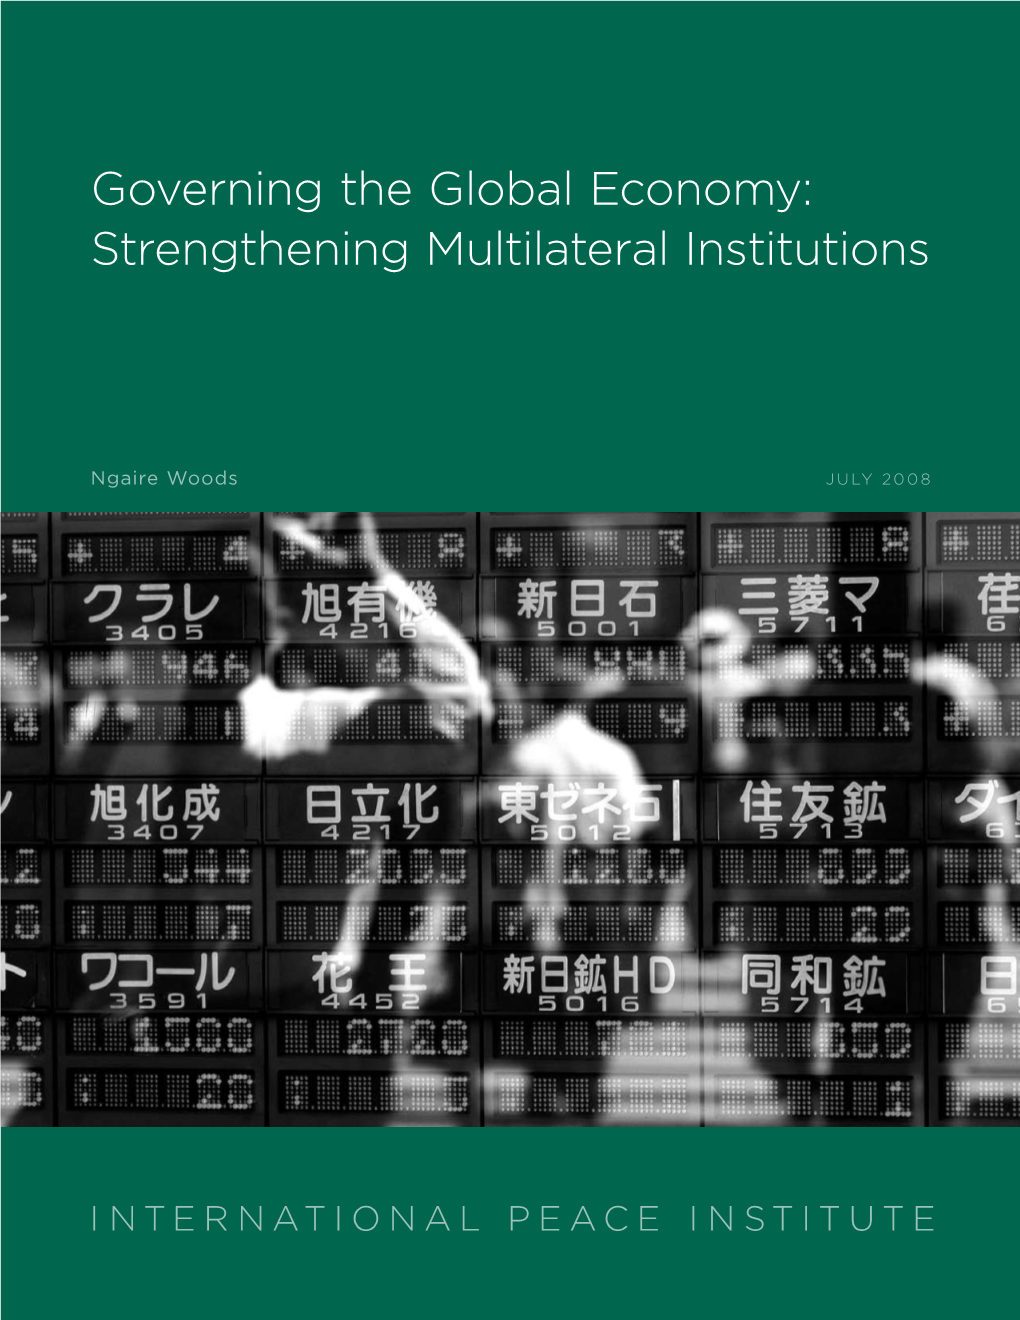 Governing the Global Economy: Strengthening Multilateral Institutions